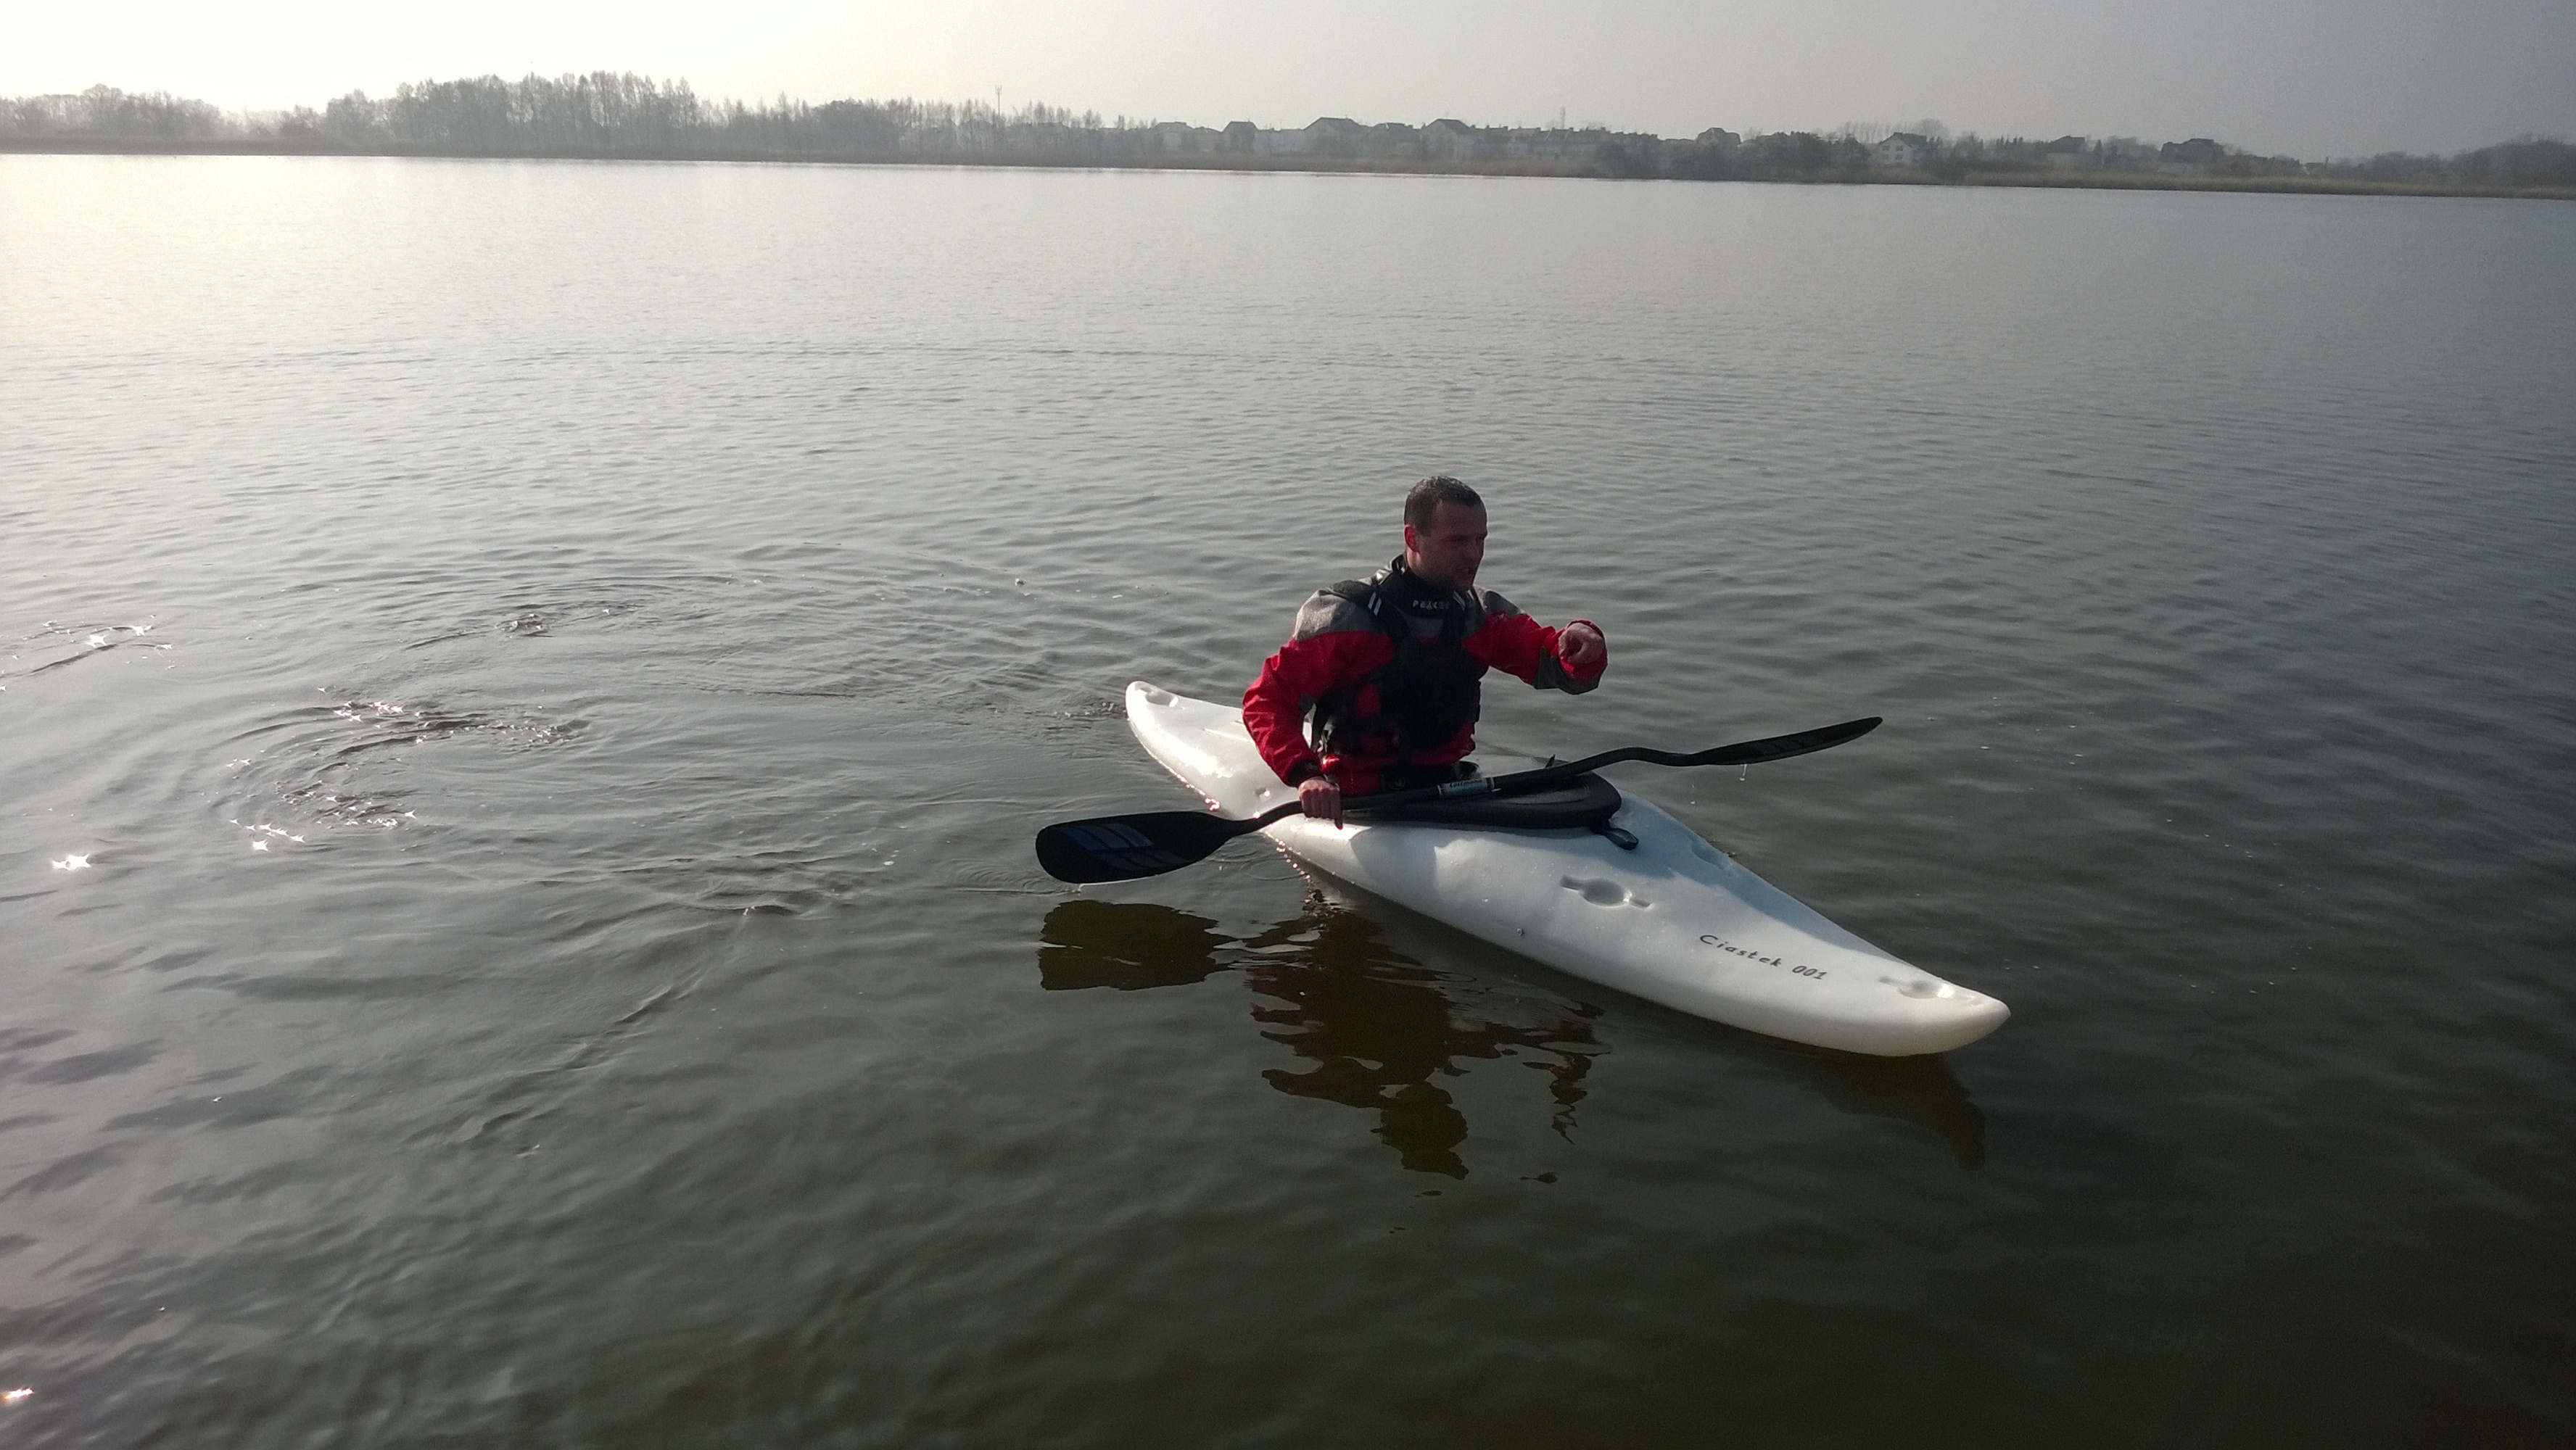 Author on the prototype on the water - first try :-) (white HDPE).